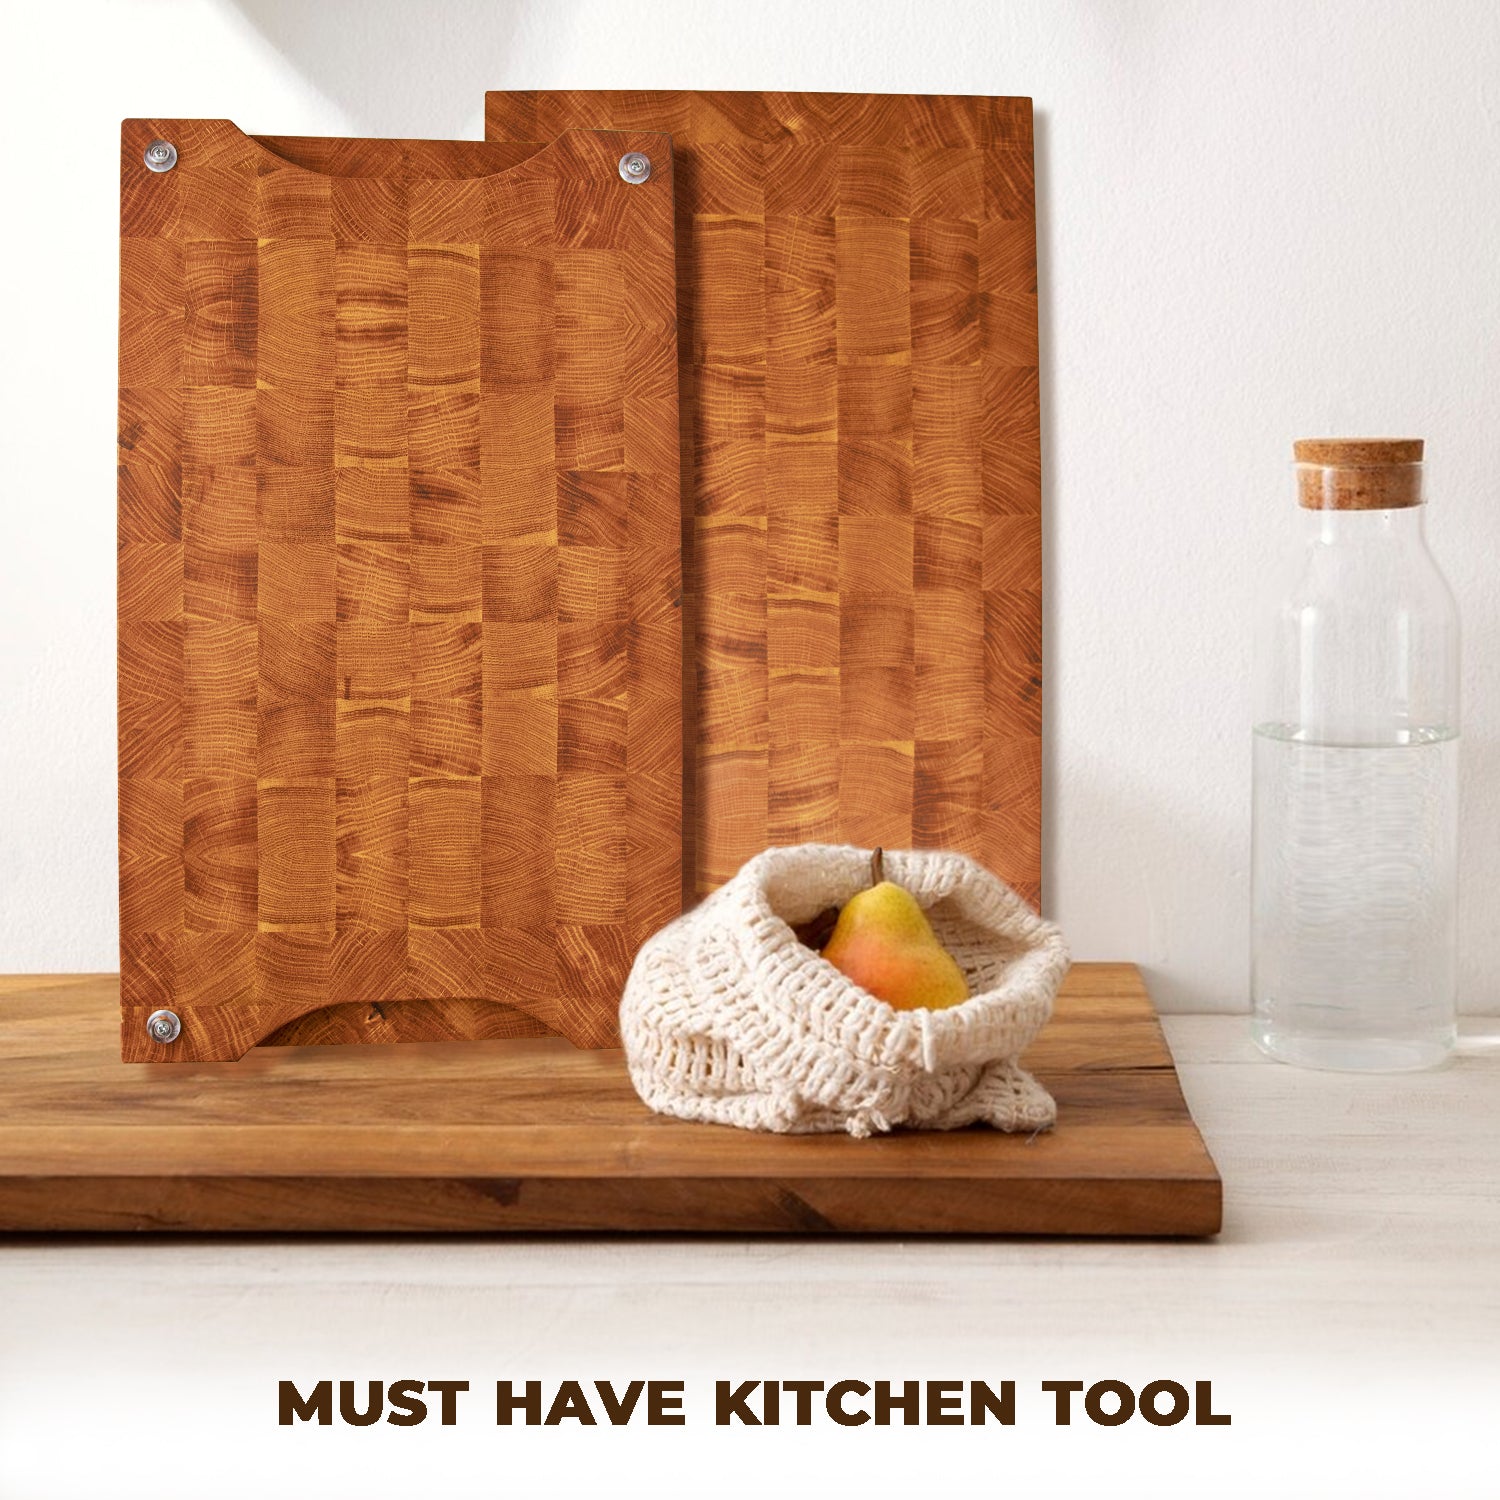 Wooden Cutting Board for Kitchen (20 x 12 Inches) - Kitchen Essentials for Cooking - Large Cutting Board